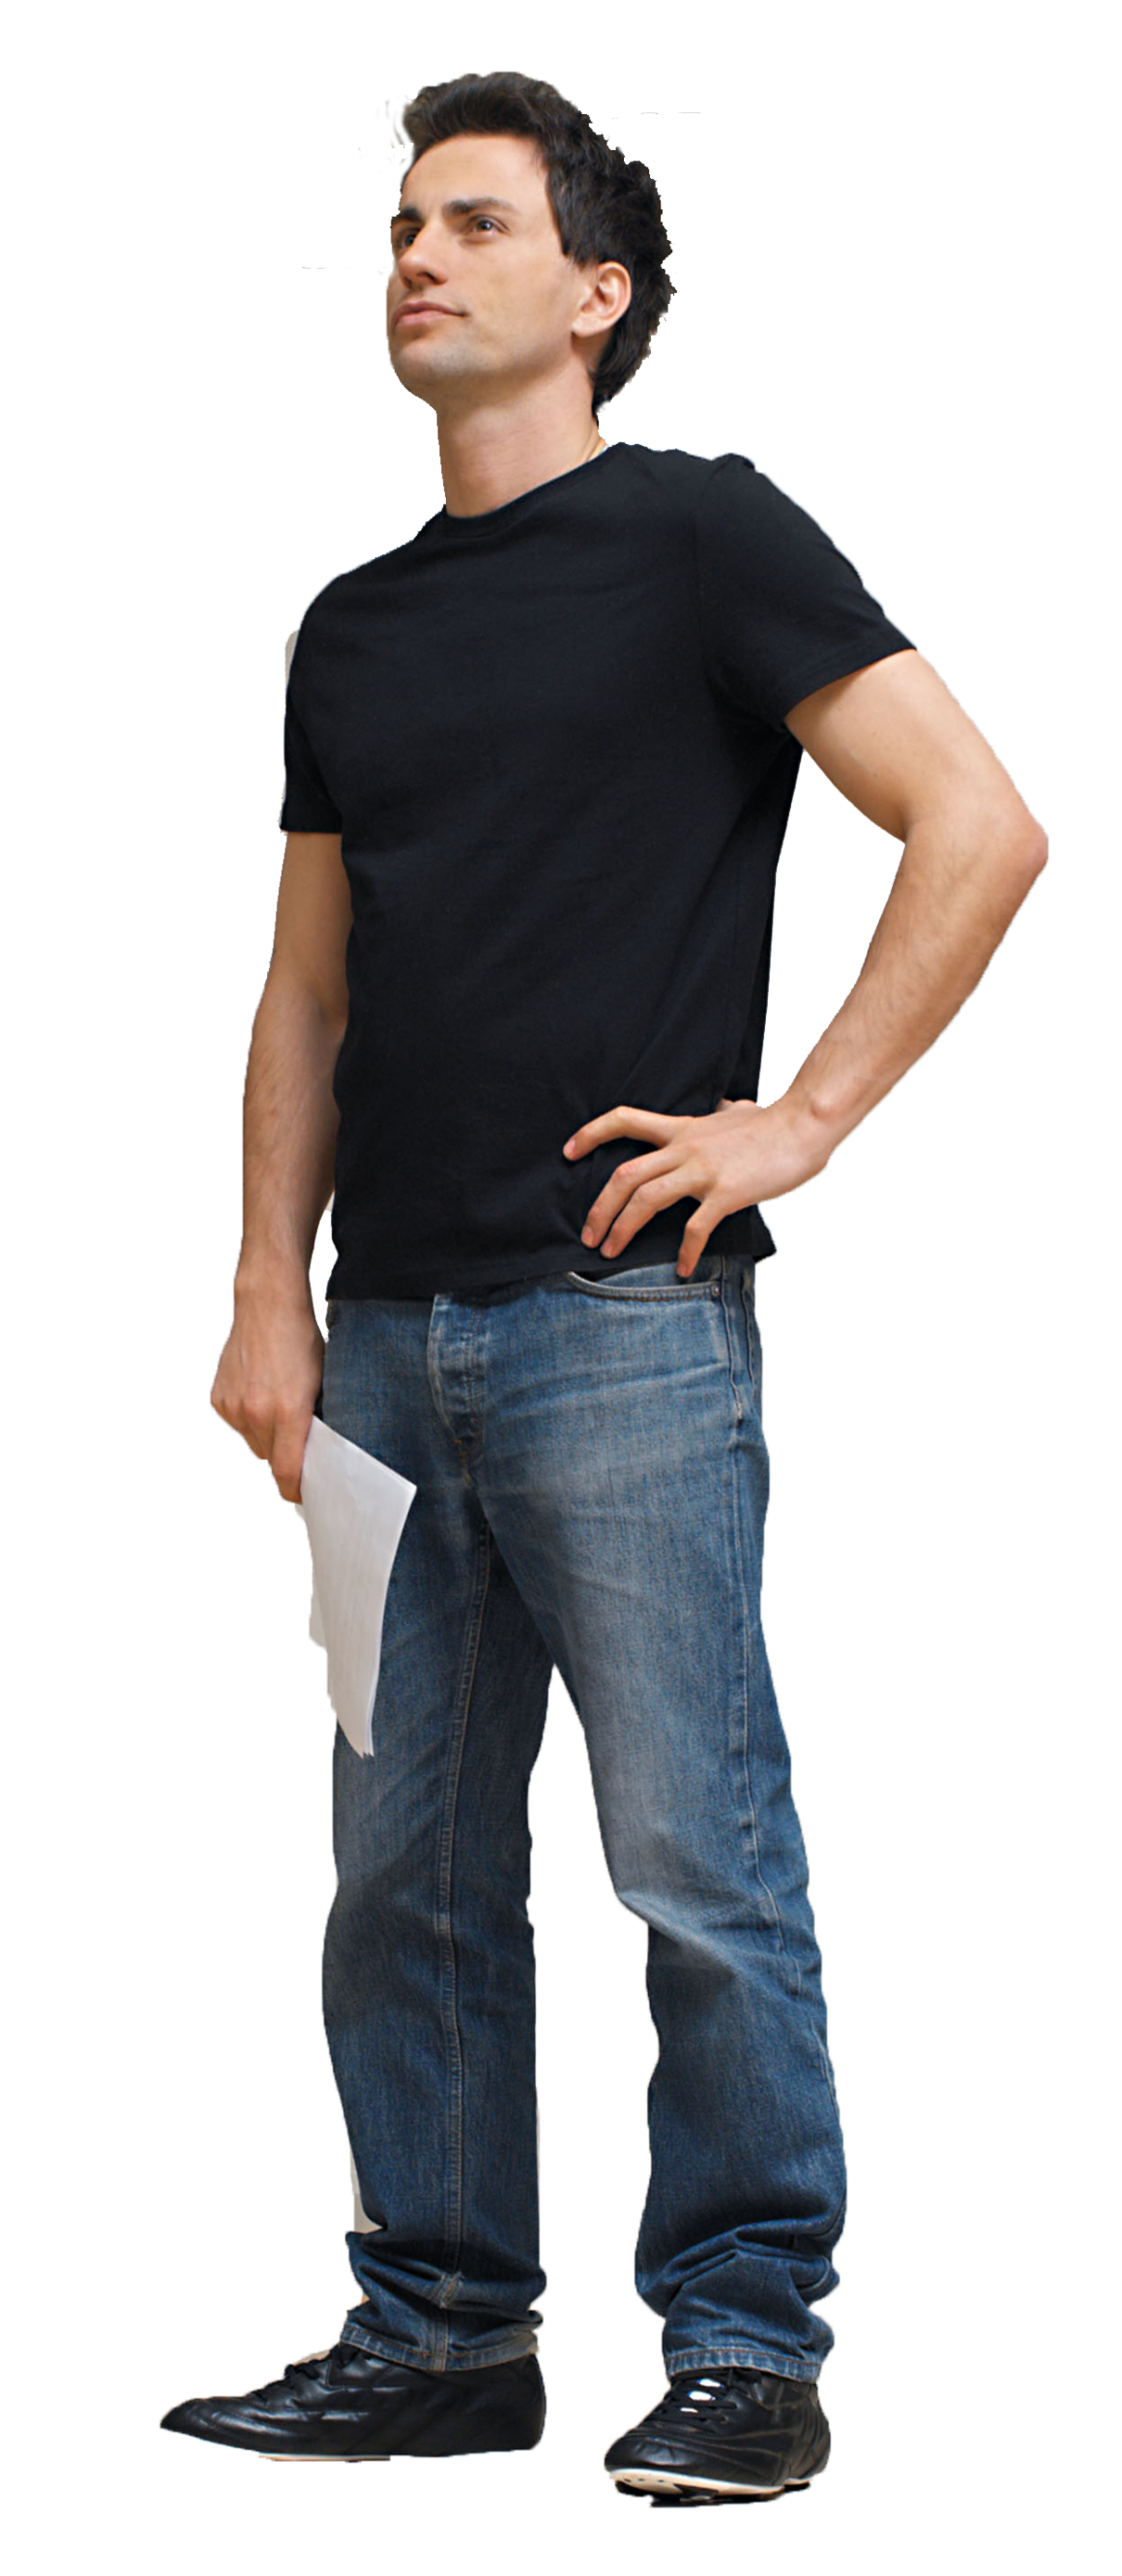 Tall Clipart Handsome Man Tall Handsome Man Transparent Free For